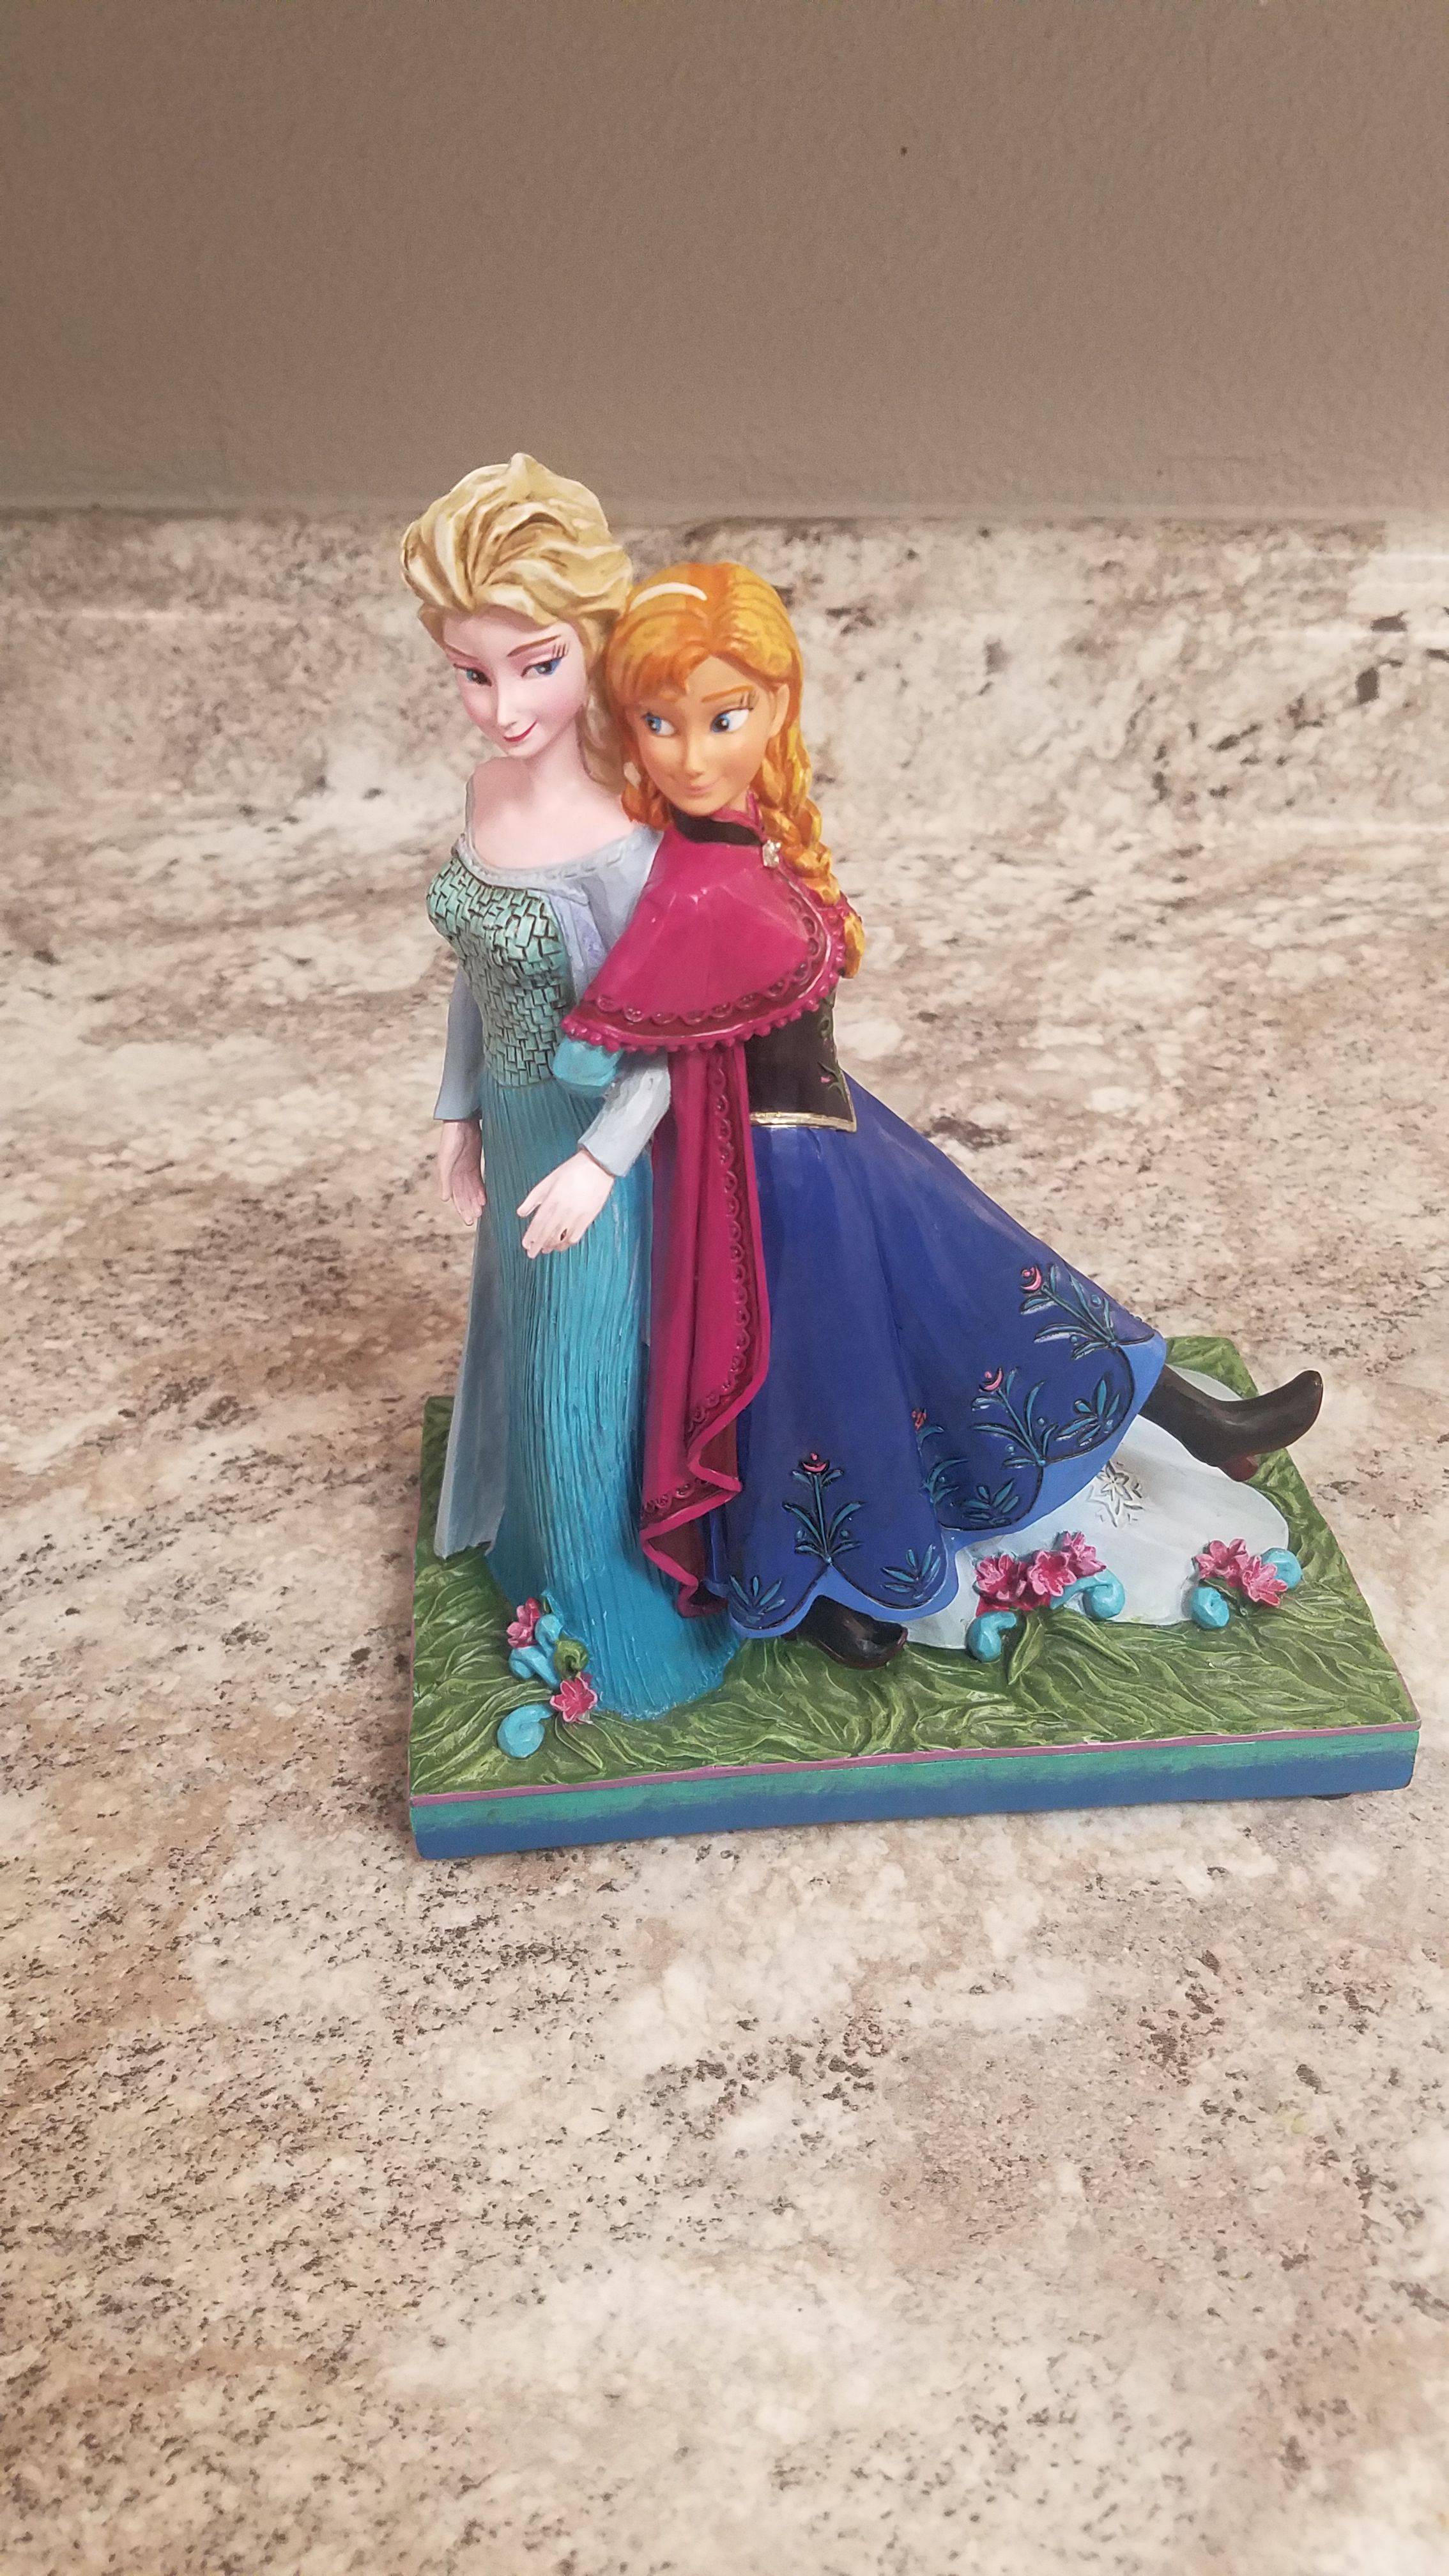 Frozen anna and elsa sisters music box figure